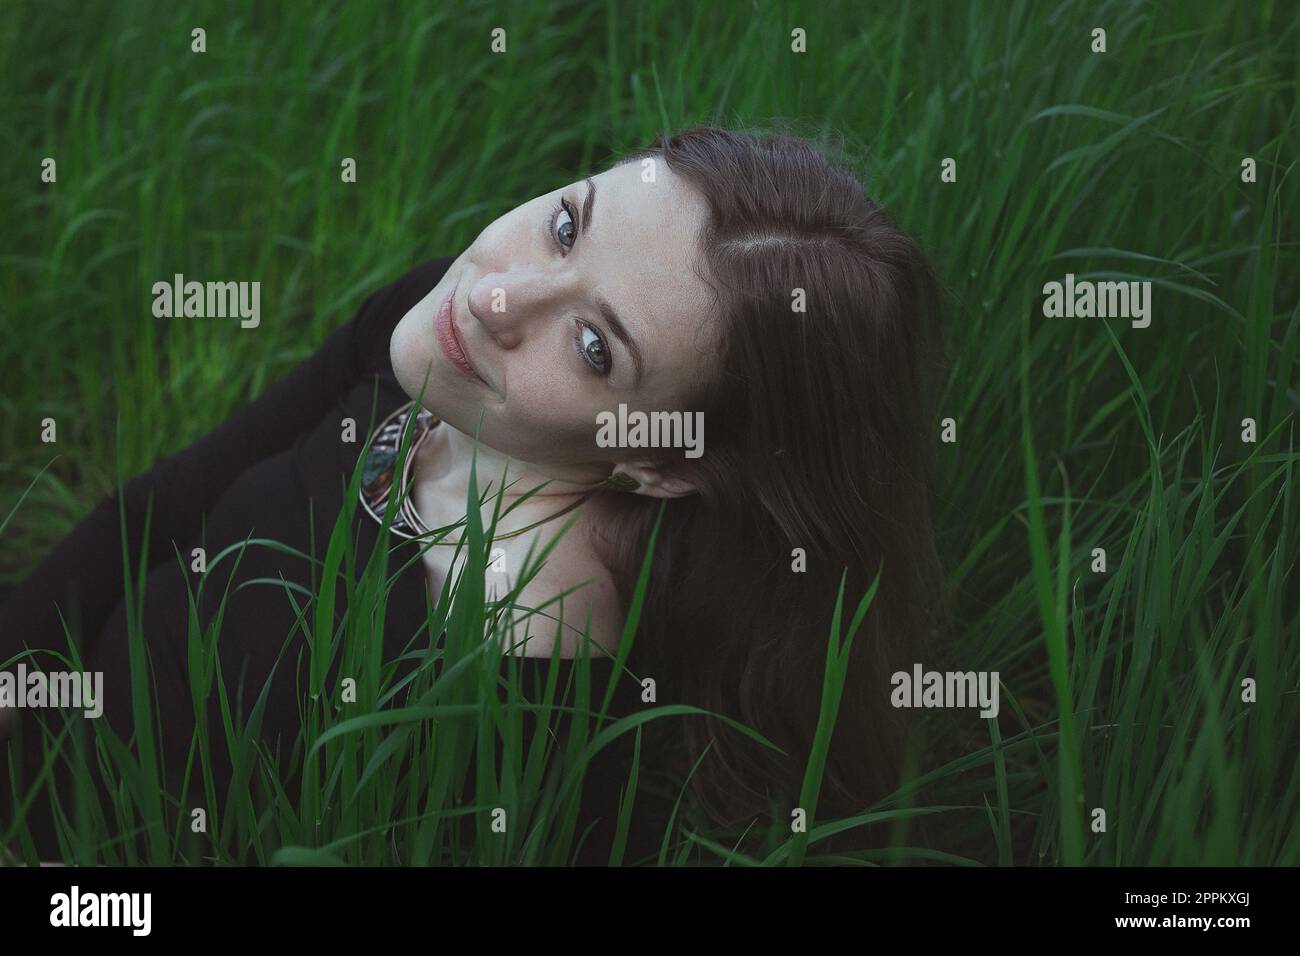 Close up smirking woman in tall grass staring directly into camera portrait picture Stock Photo